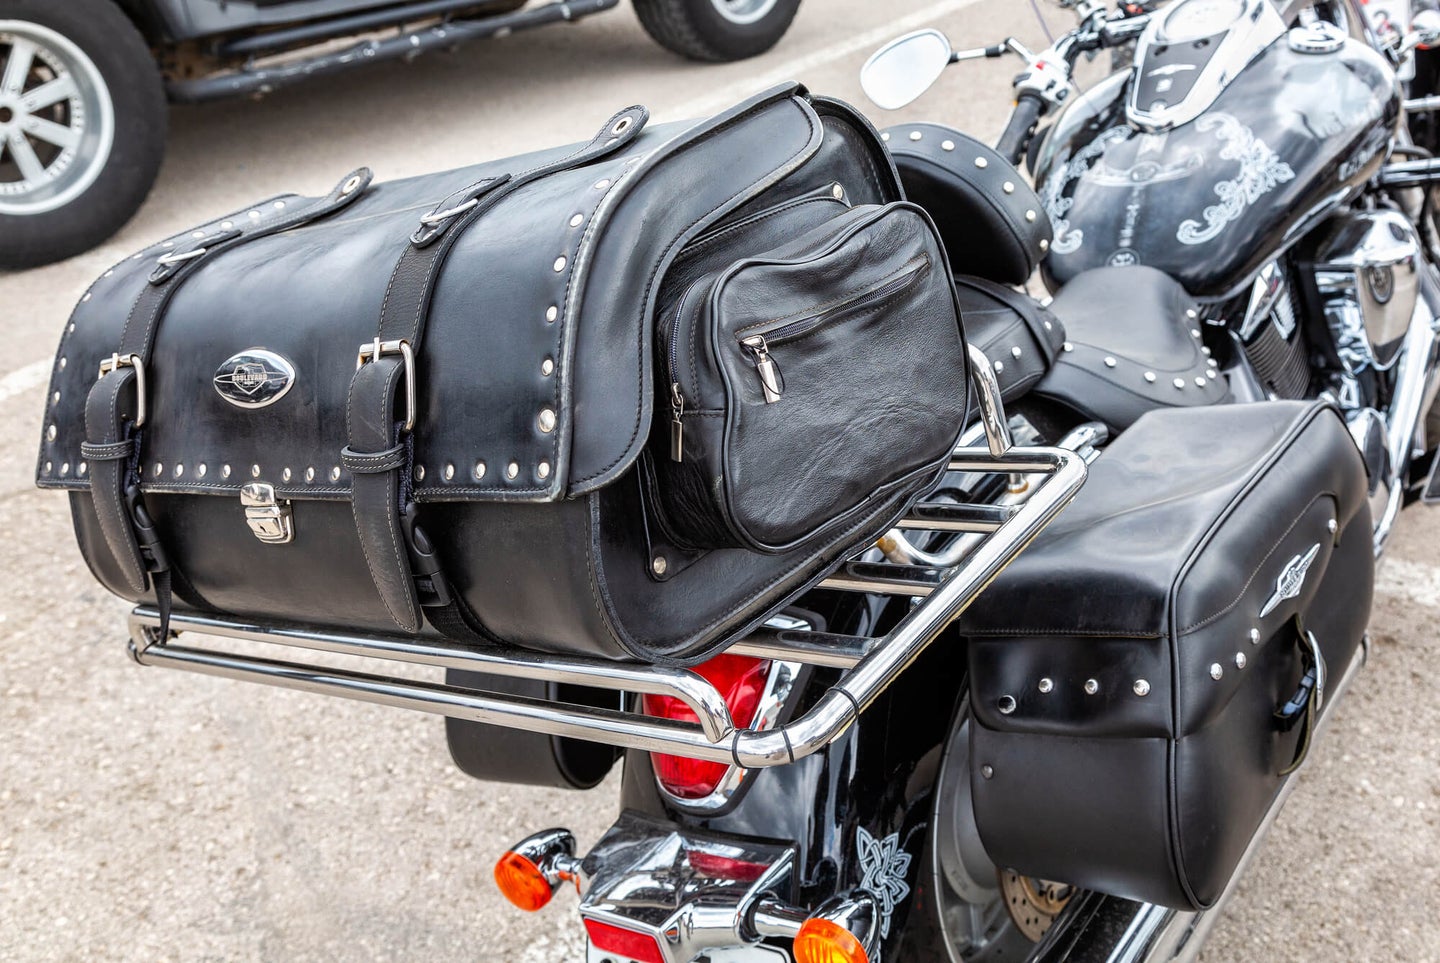 Best Motorcycle Tail Bags: A Convenient and Secure Storage Option